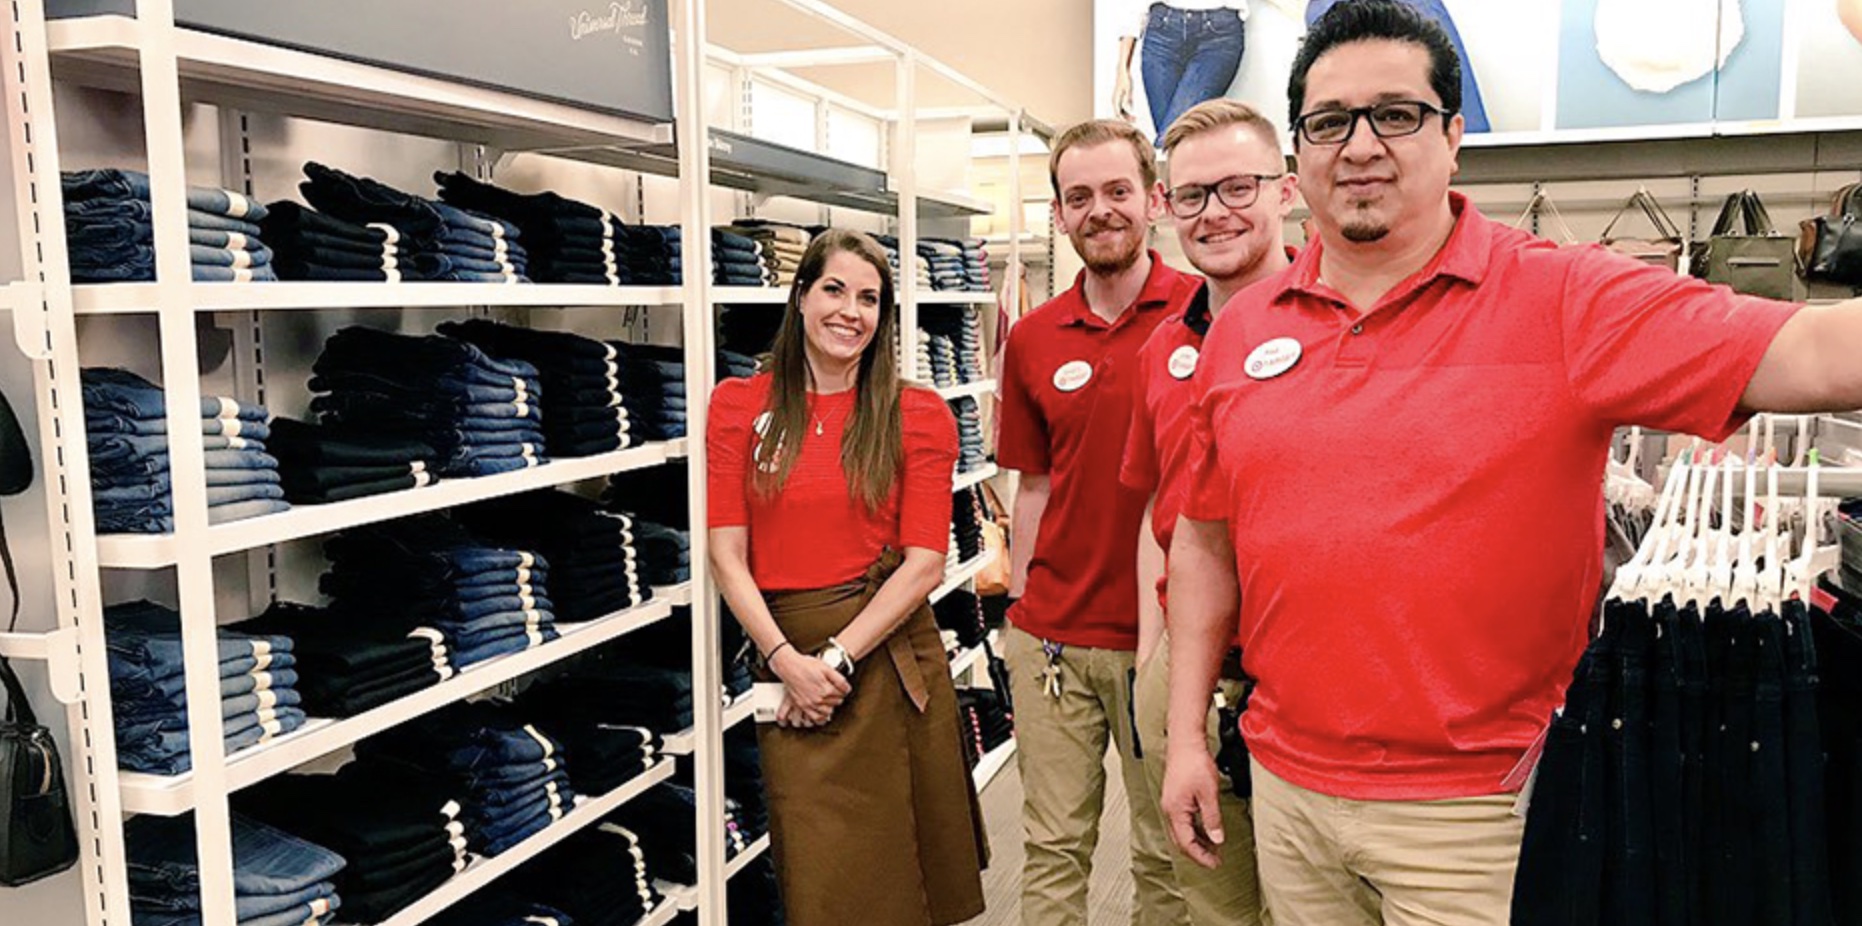 What Is The Target's Dress Code? (Updated) - AisleofShame.com